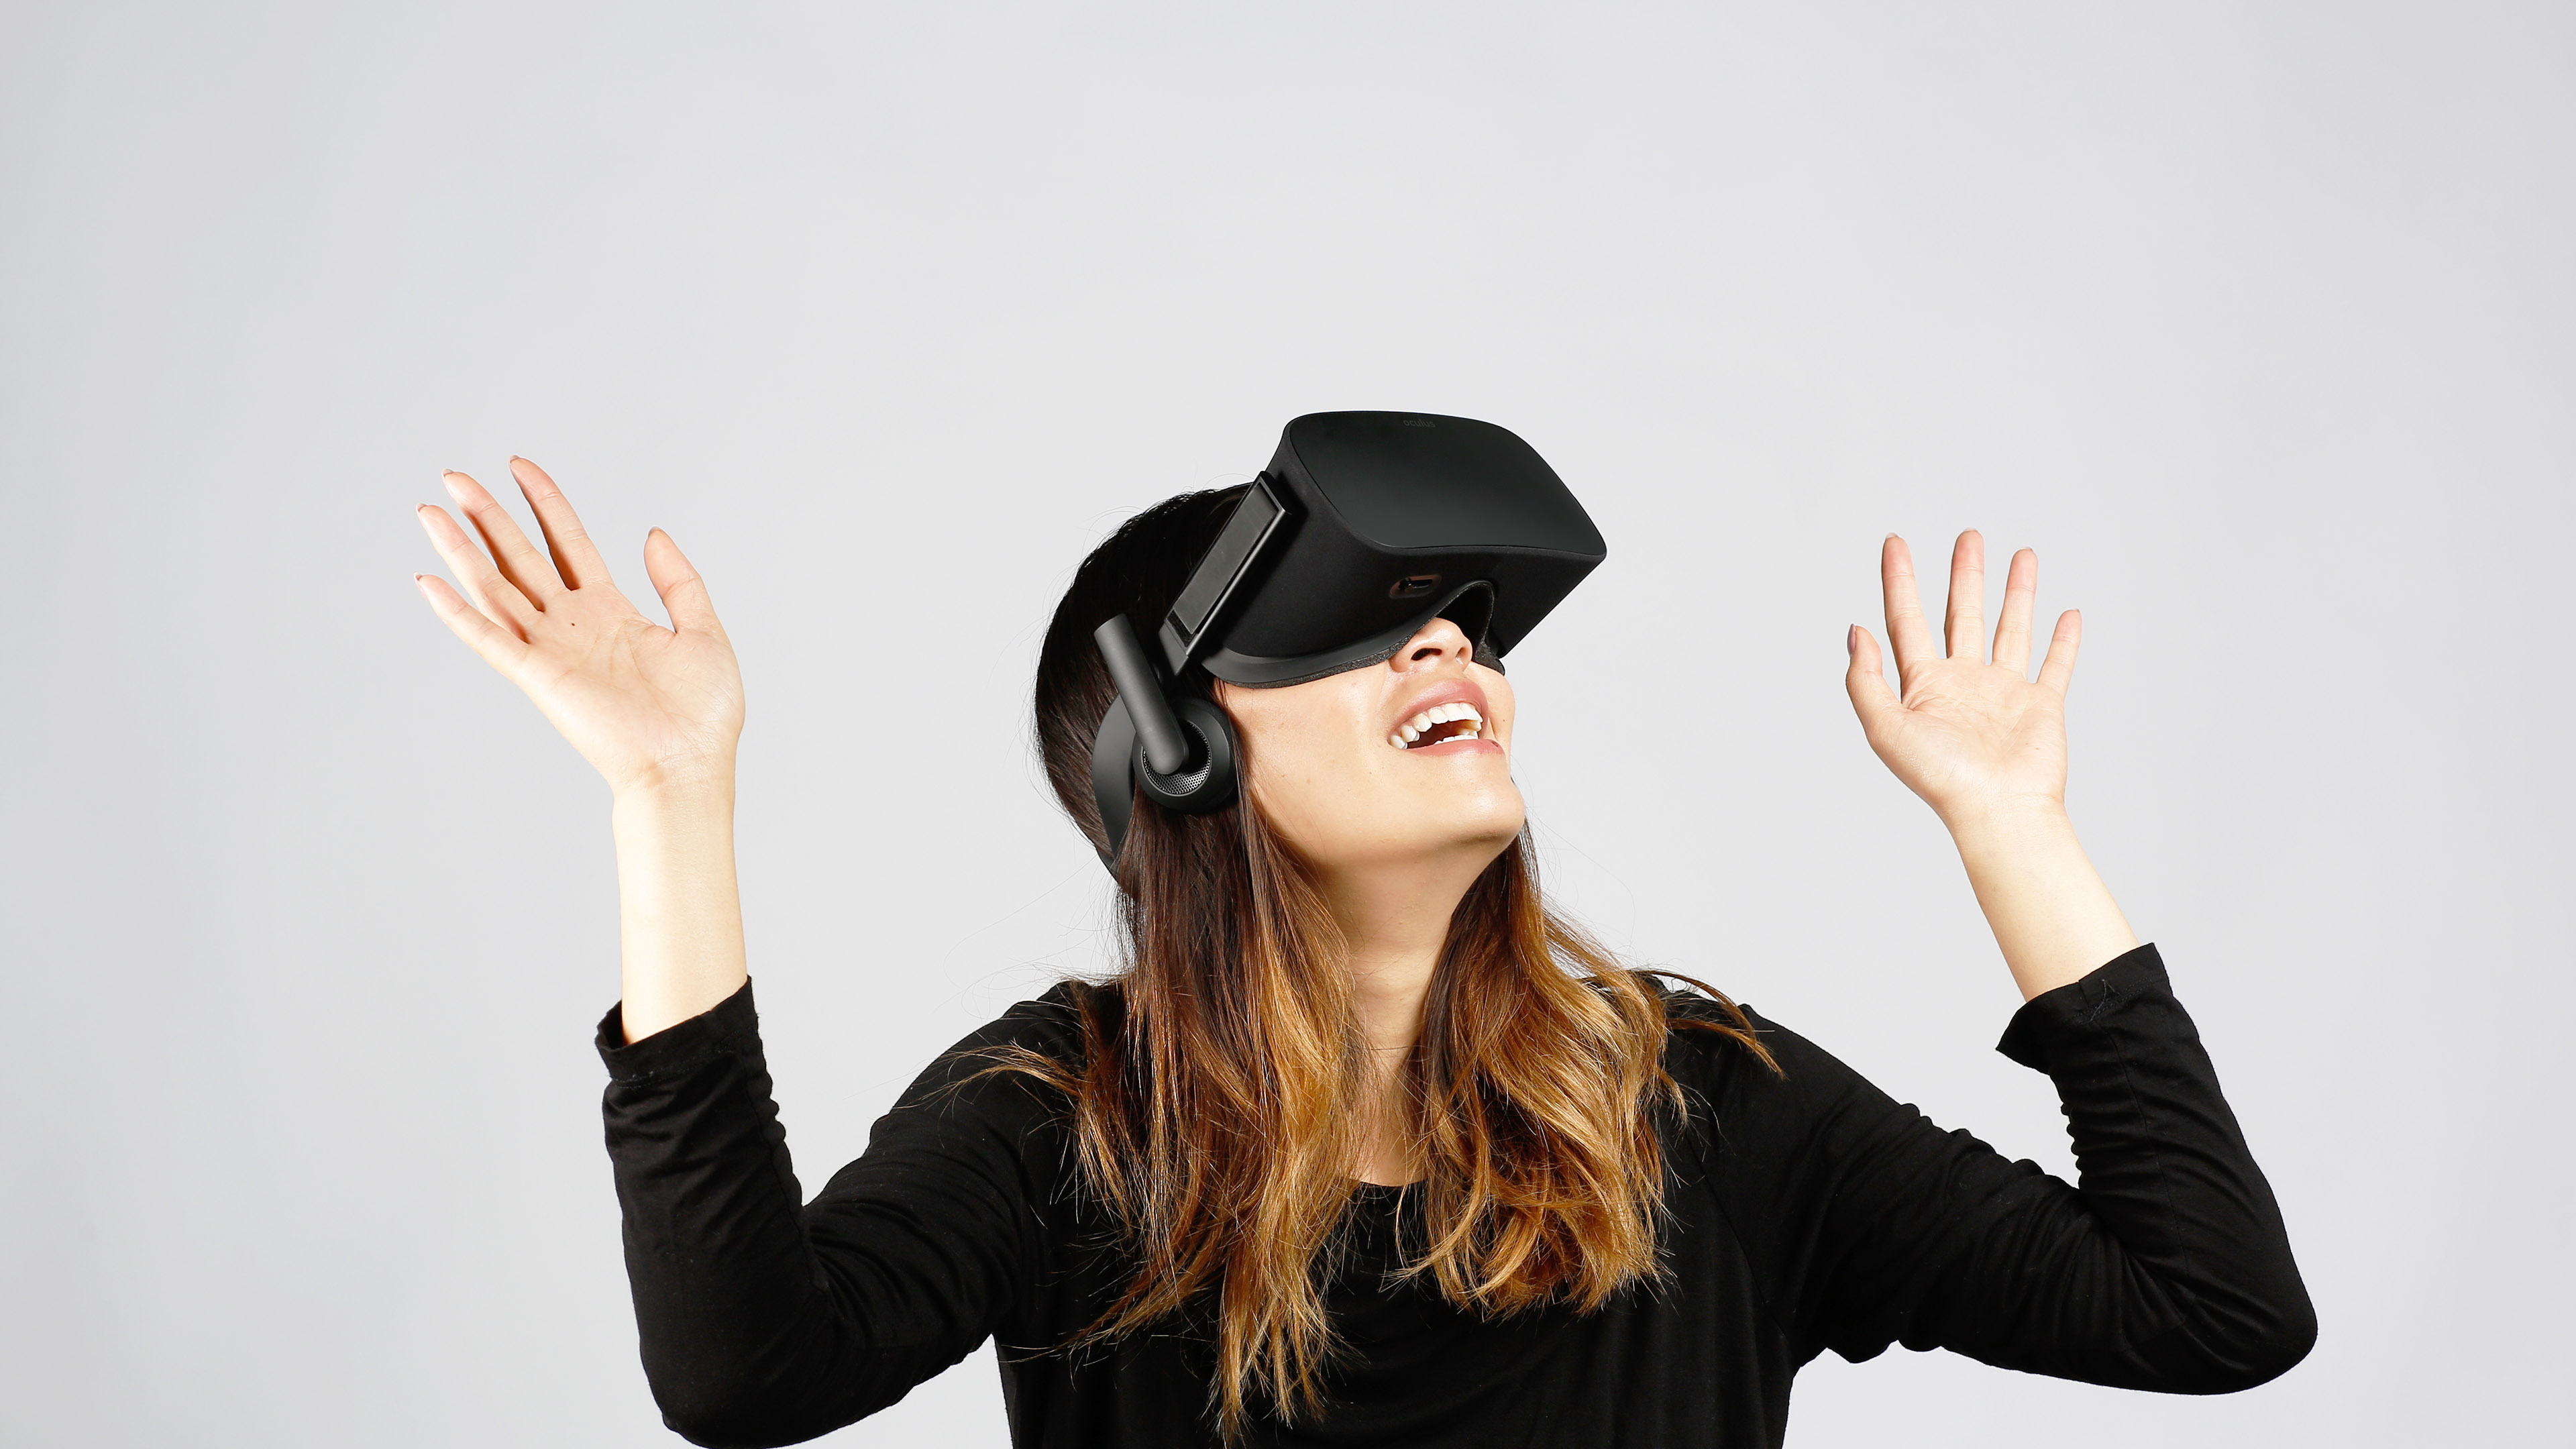 Oculus Rift comes to 48 Best Buy stores May 7th